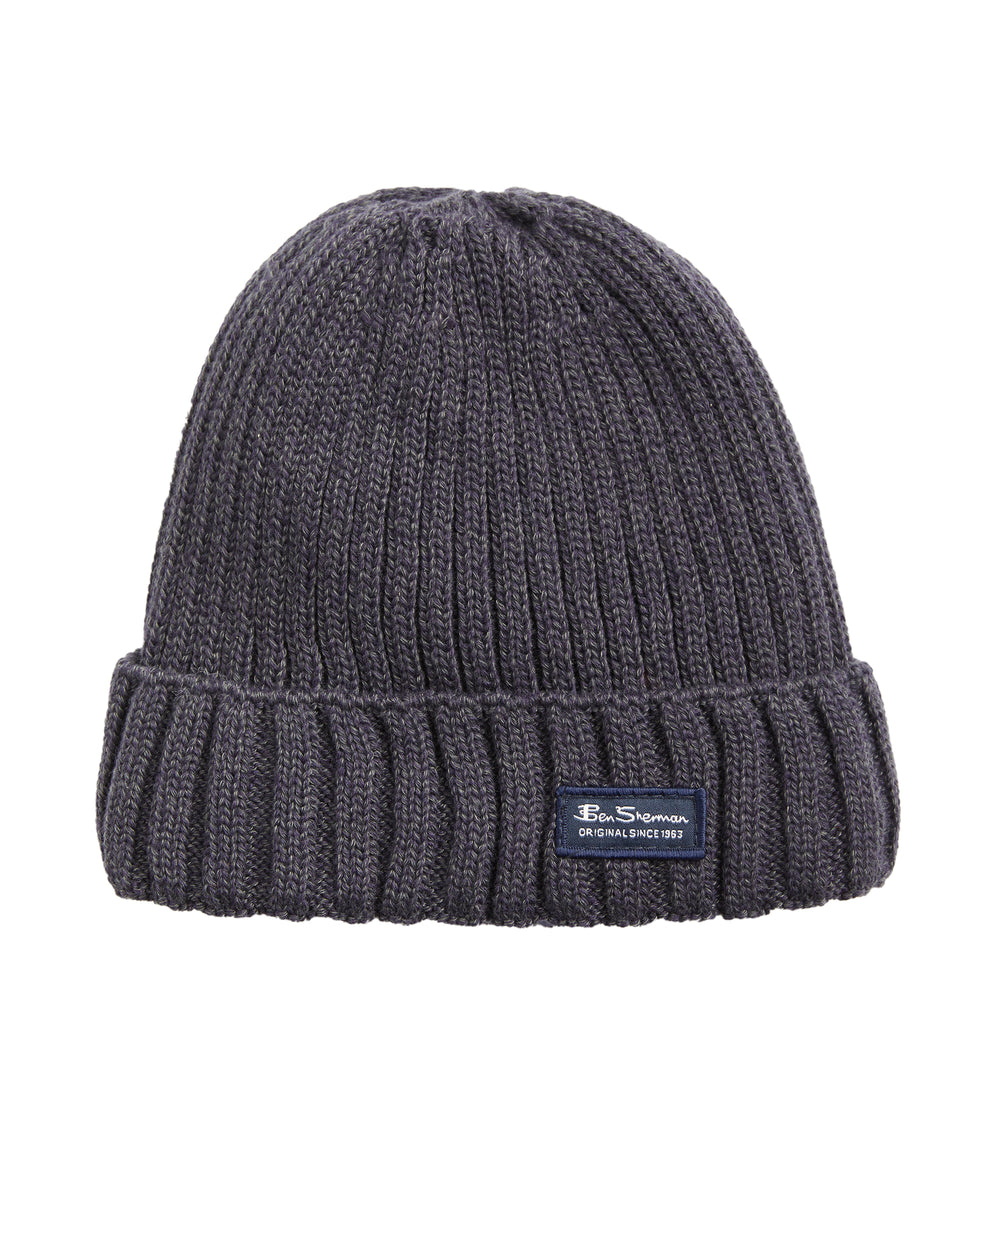 Men's Ribbed Hat with Thermal Plush Lining - Blue